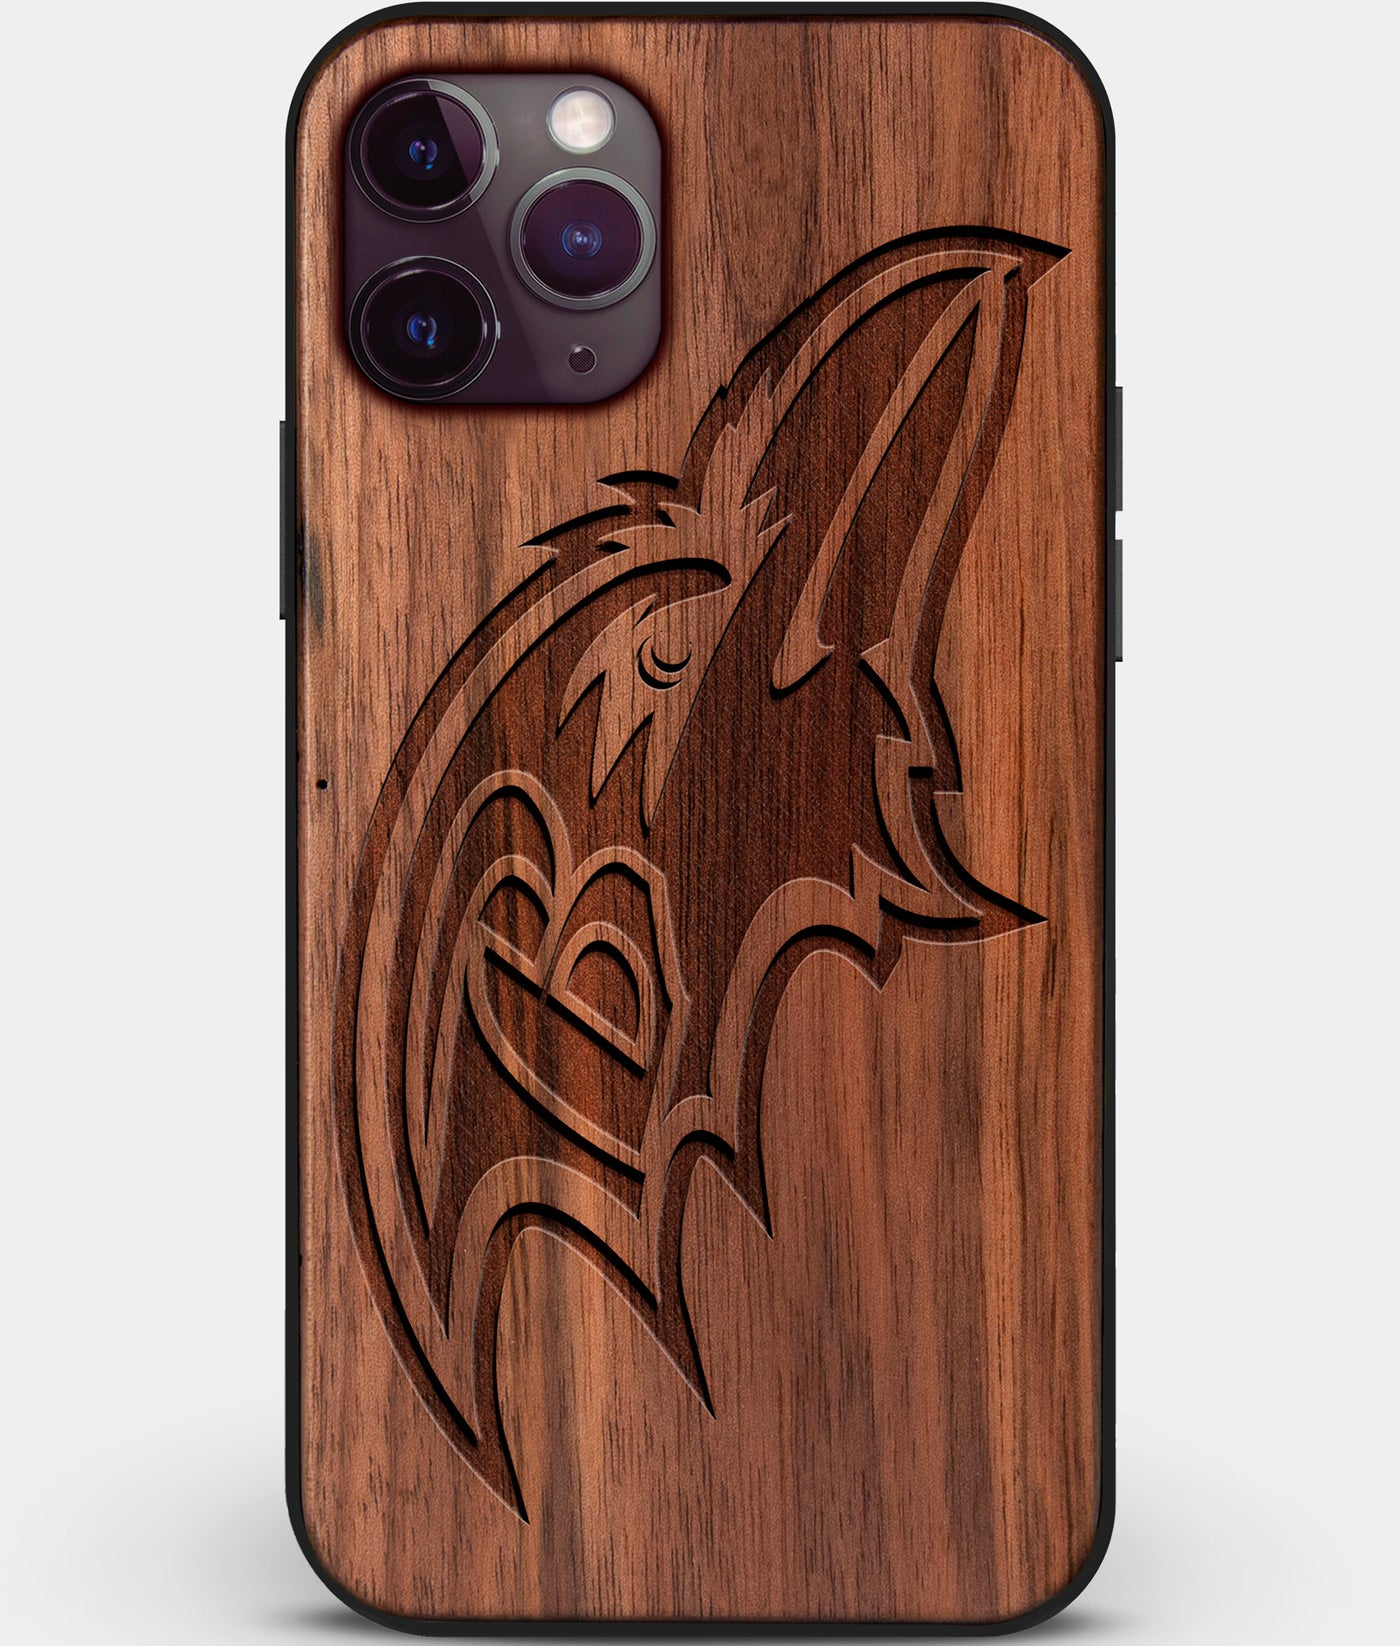 Custom Carved Wood Baltimore Ravens iPhone 11 Pro Max Case | Personalized Walnut Wood Baltimore Ravens Cover, Birthday Gift, Gifts For Him, Monogrammed Gift For Fan | by Engraved In Nature